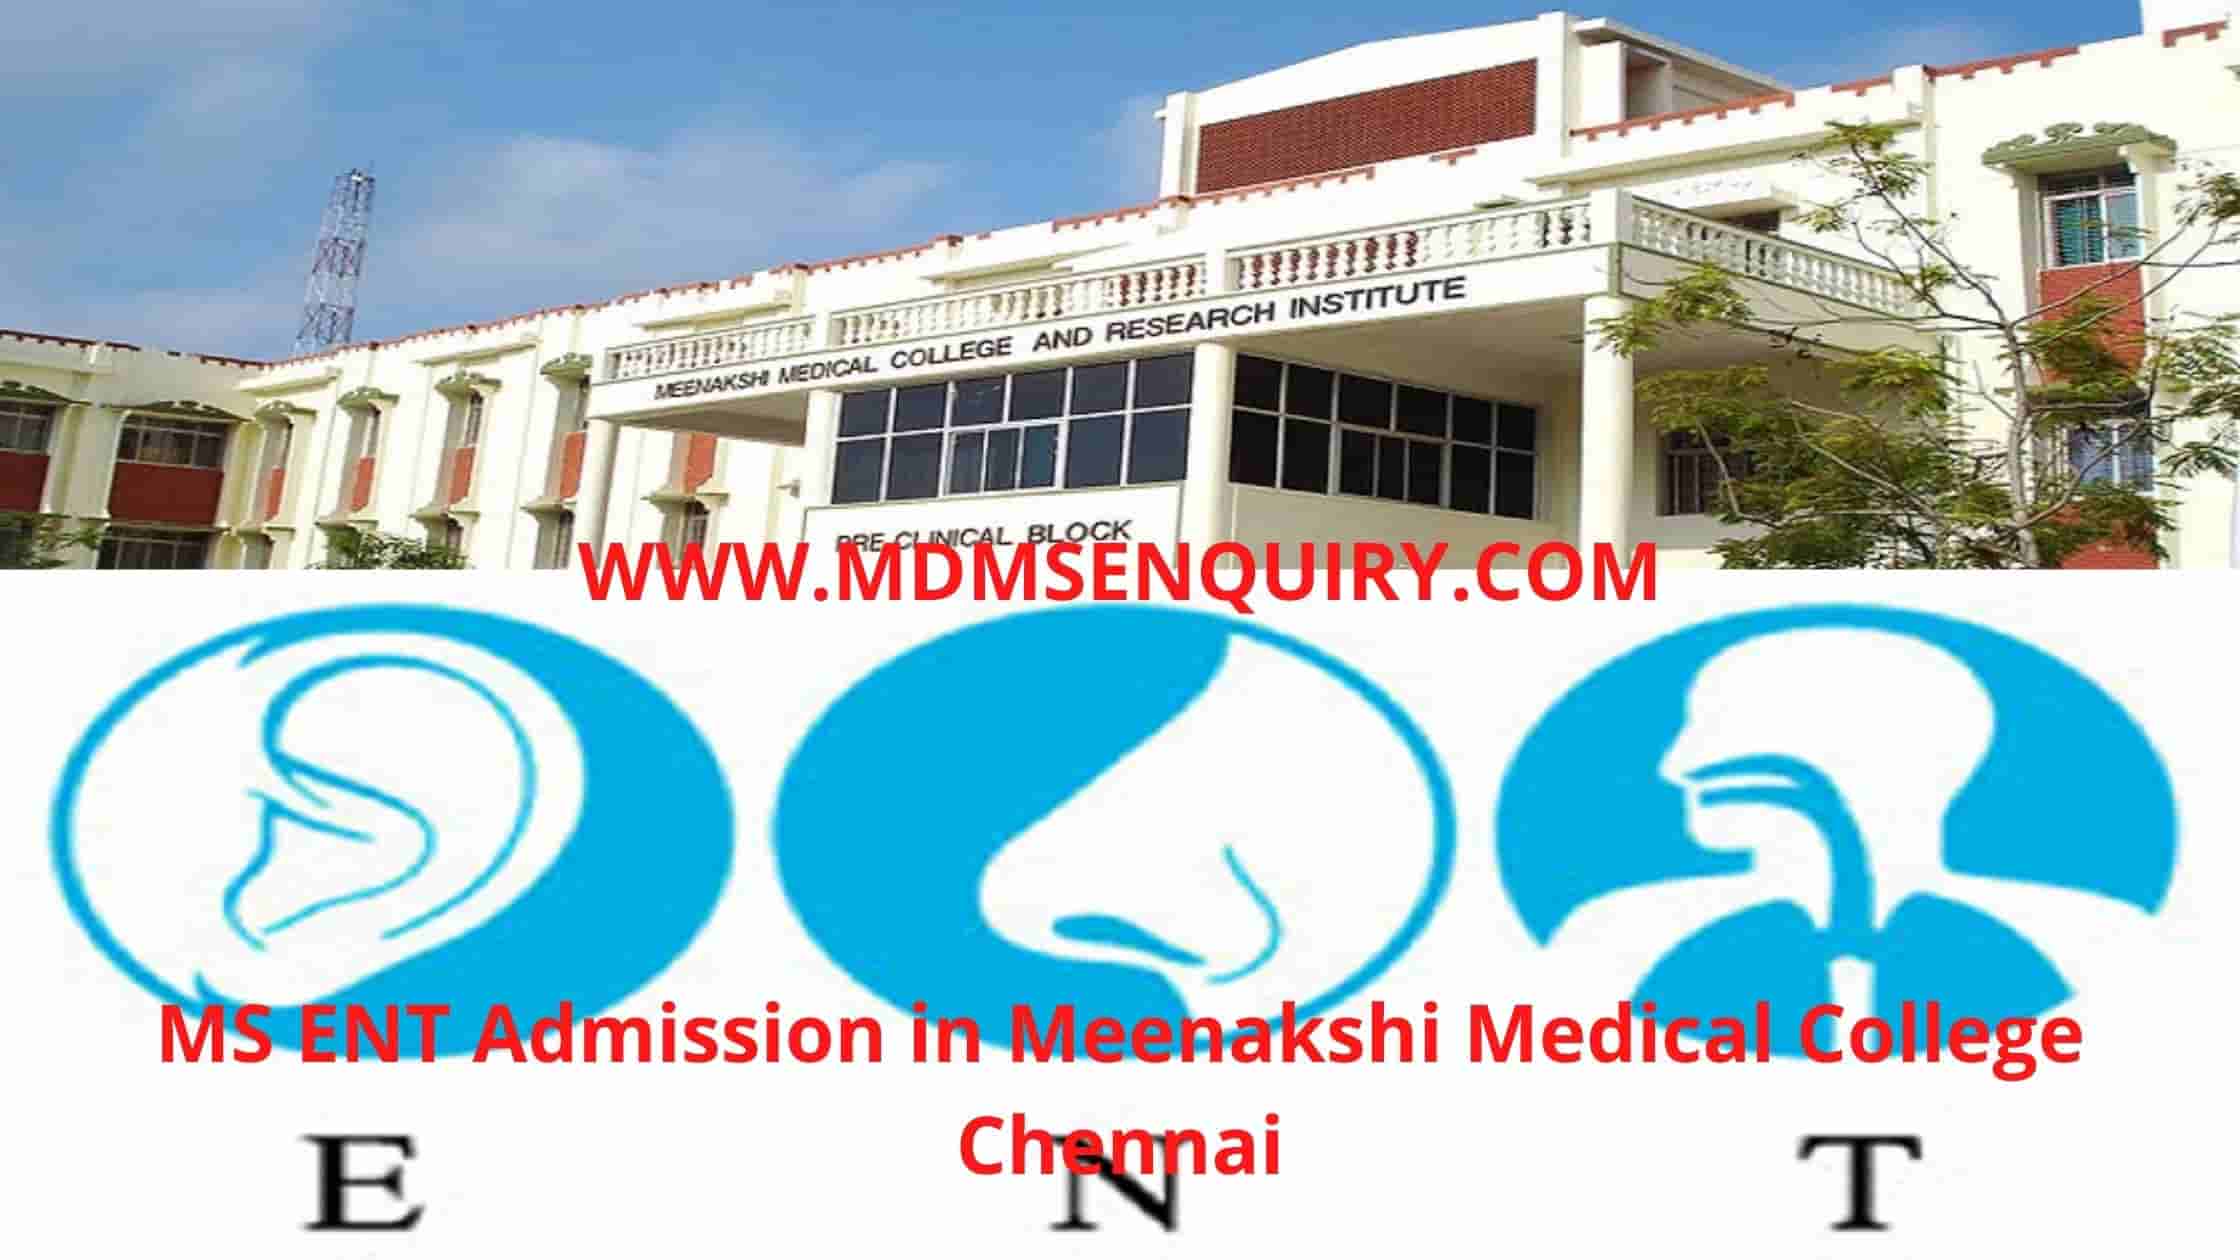 MS ENT admission in Meenakshi Medical College Chennai